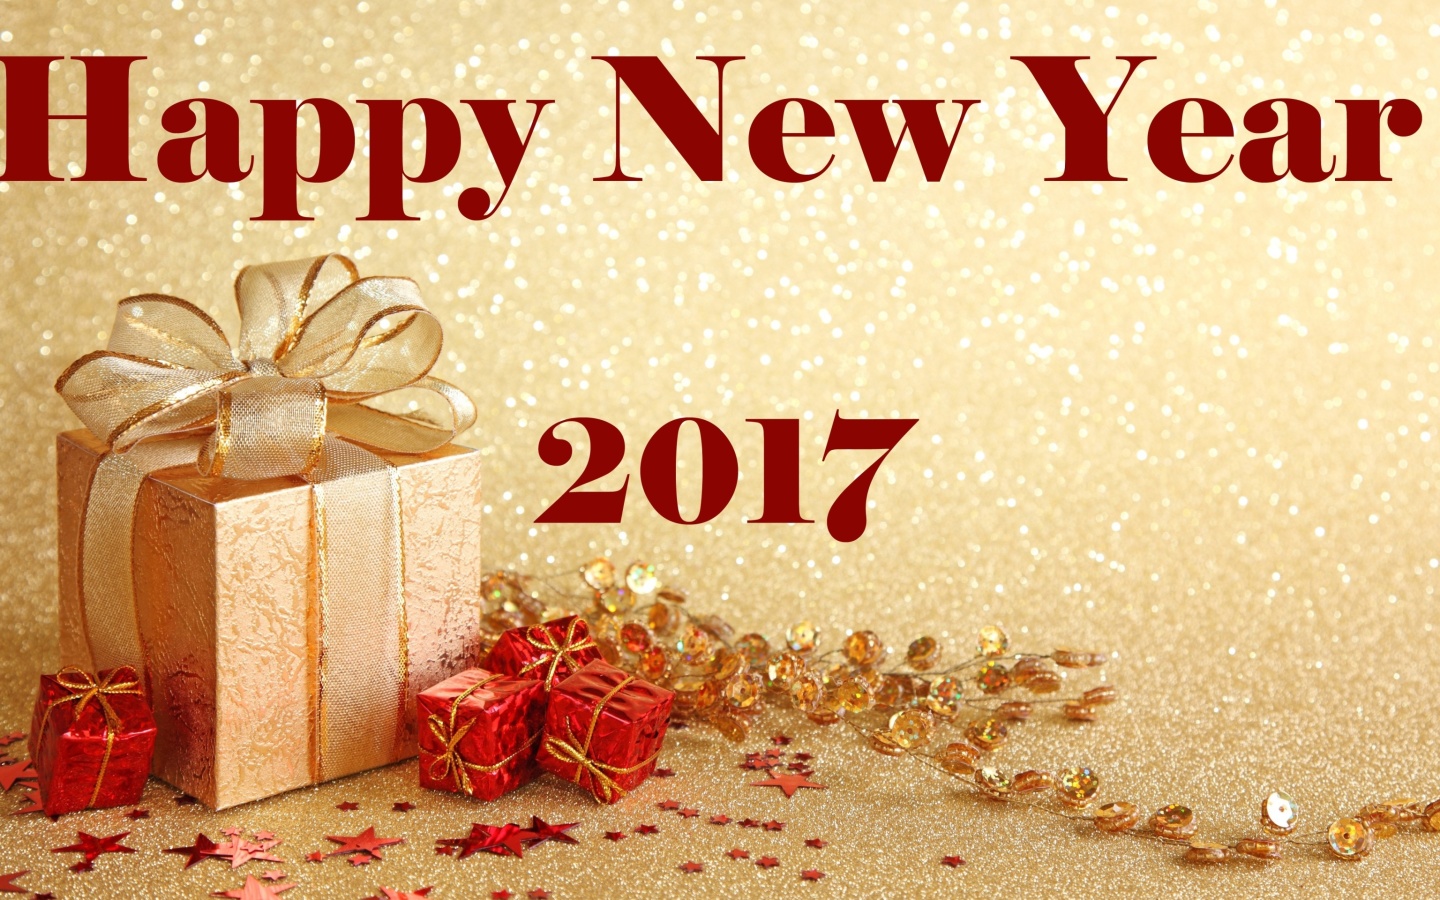 Das Happy New Year 2017 with Gifts Wallpaper 1440x900